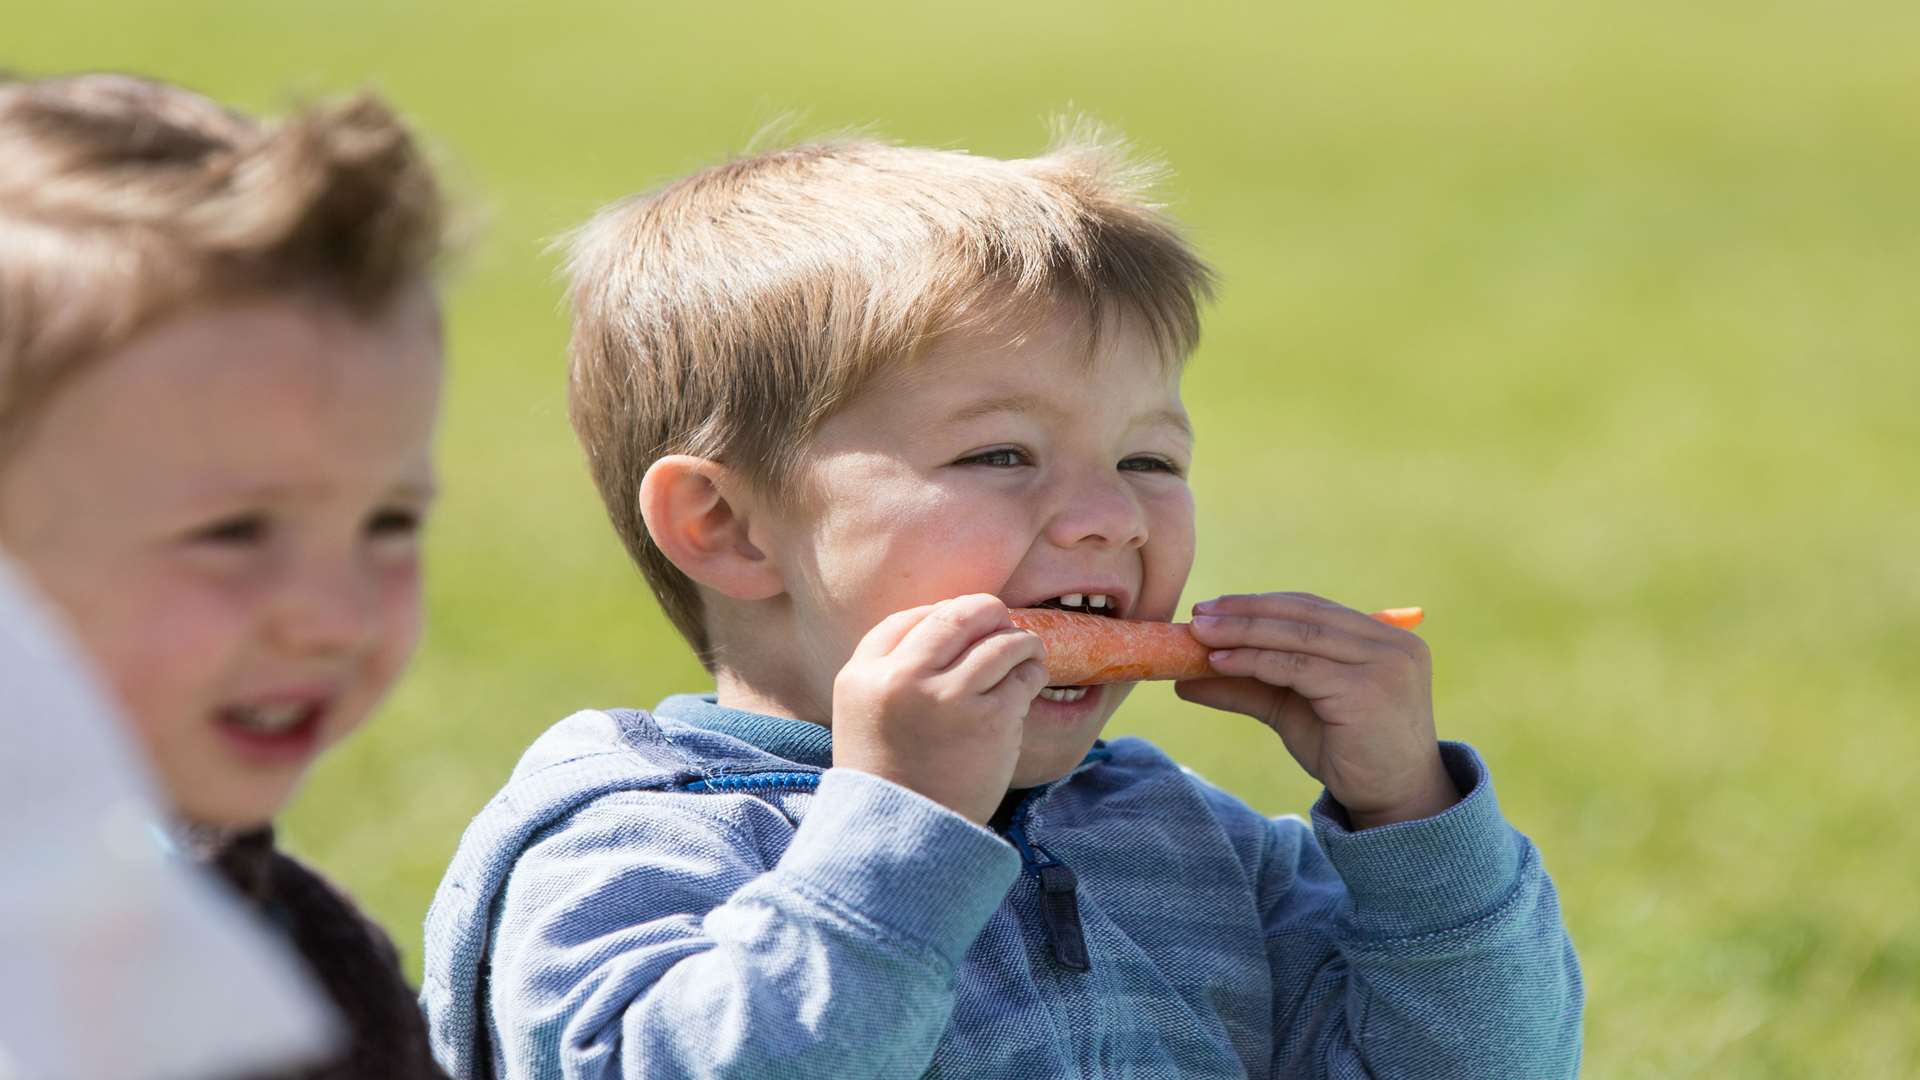 Never ask a toddler to eat, try or taste anything - ask them to kiss, lick or crunch it instead